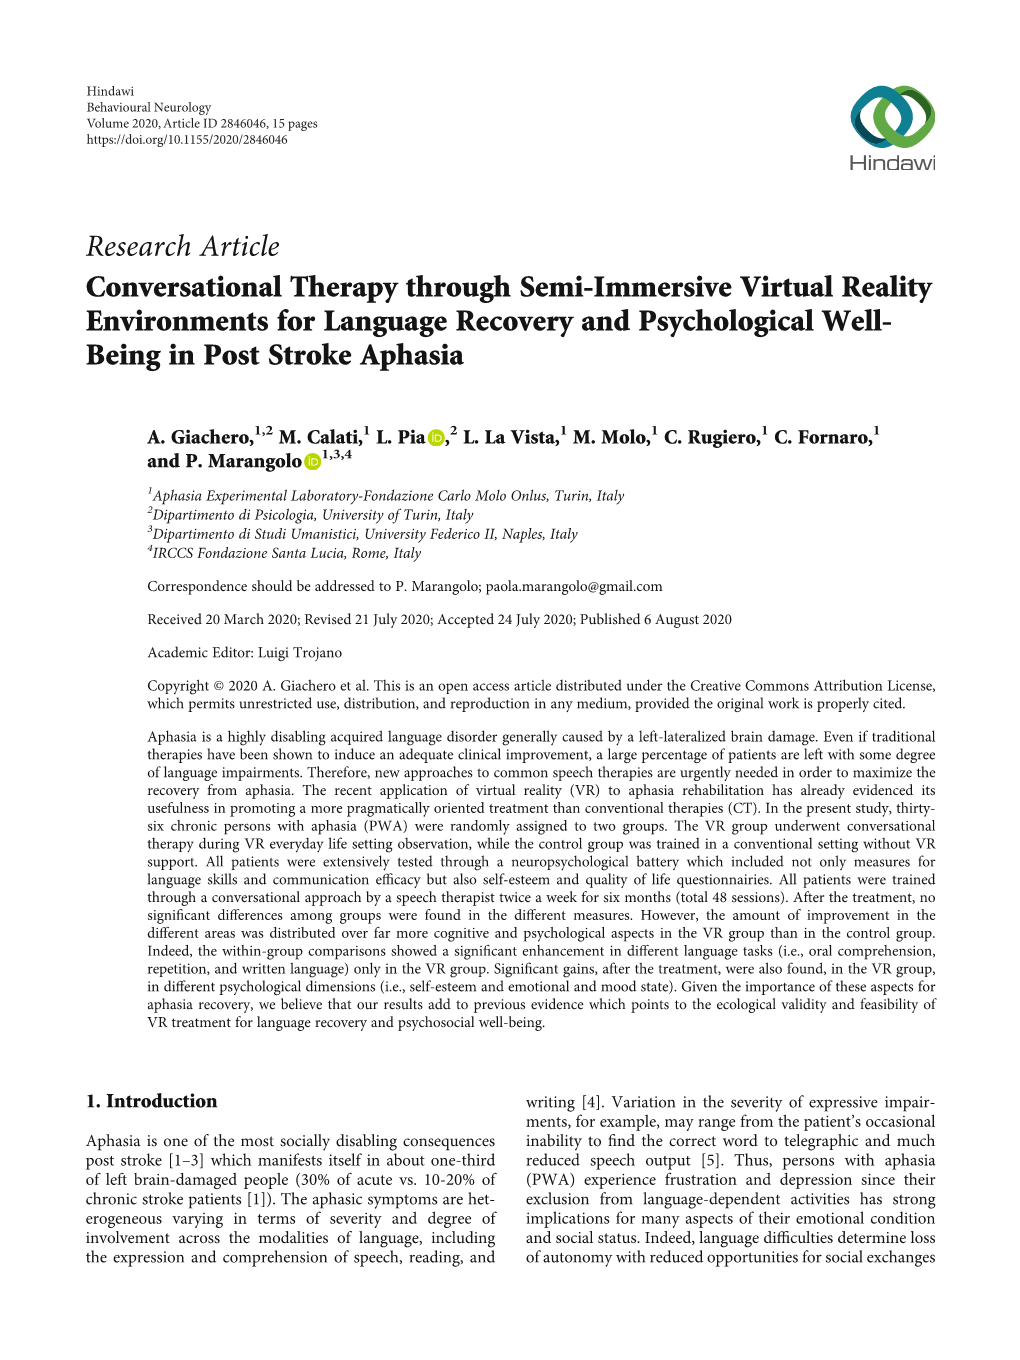 Research Article Conversational Therapy Through Semi-Immersive Virtual Reality Environments for Language Recovery and Psychological Well- Being in Post Stroke Aphasia